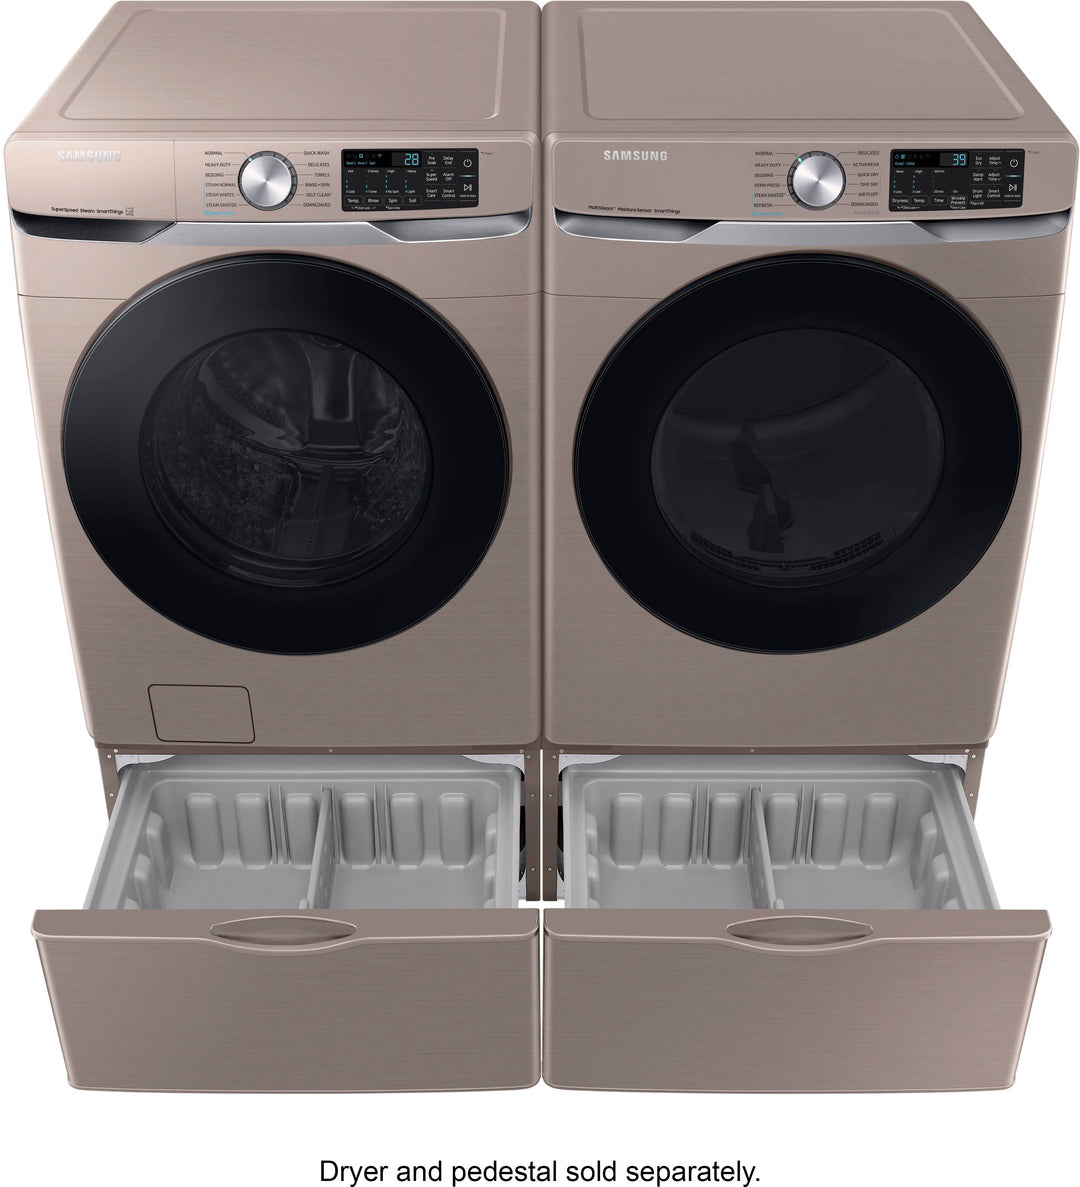 Samsung - 4.5 cu. ft. Large Capacity Smart Front Load Washer with Super Speed Wash - Champagne_8